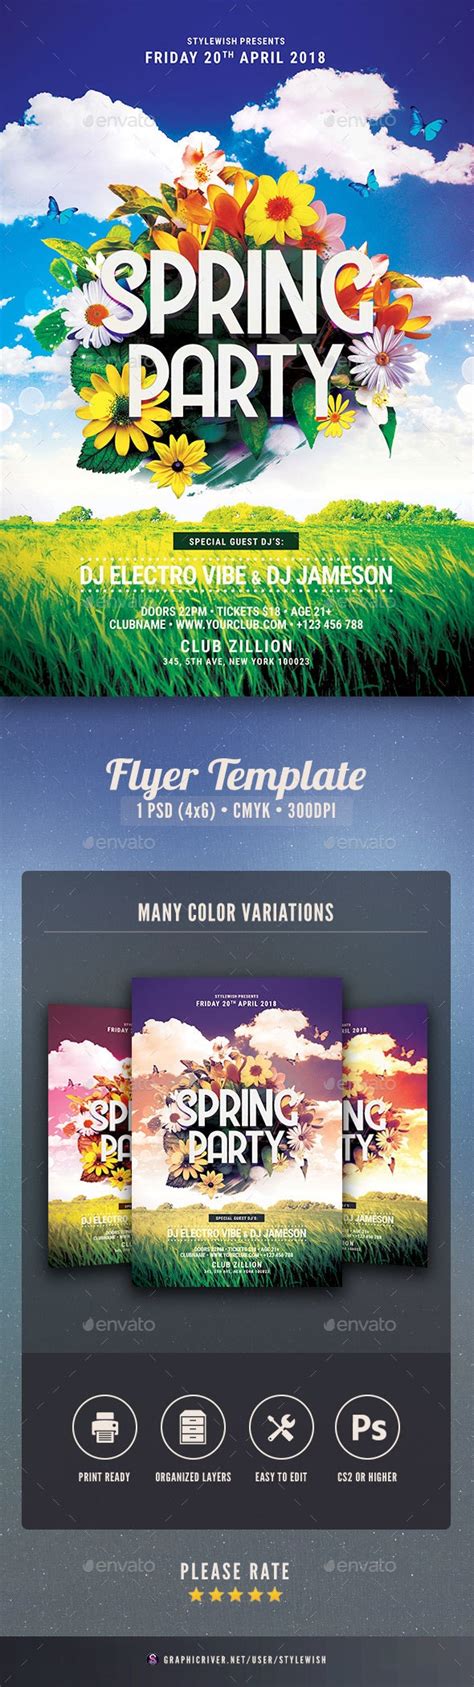 Spring Party Flyer Print Templates Graphicriver